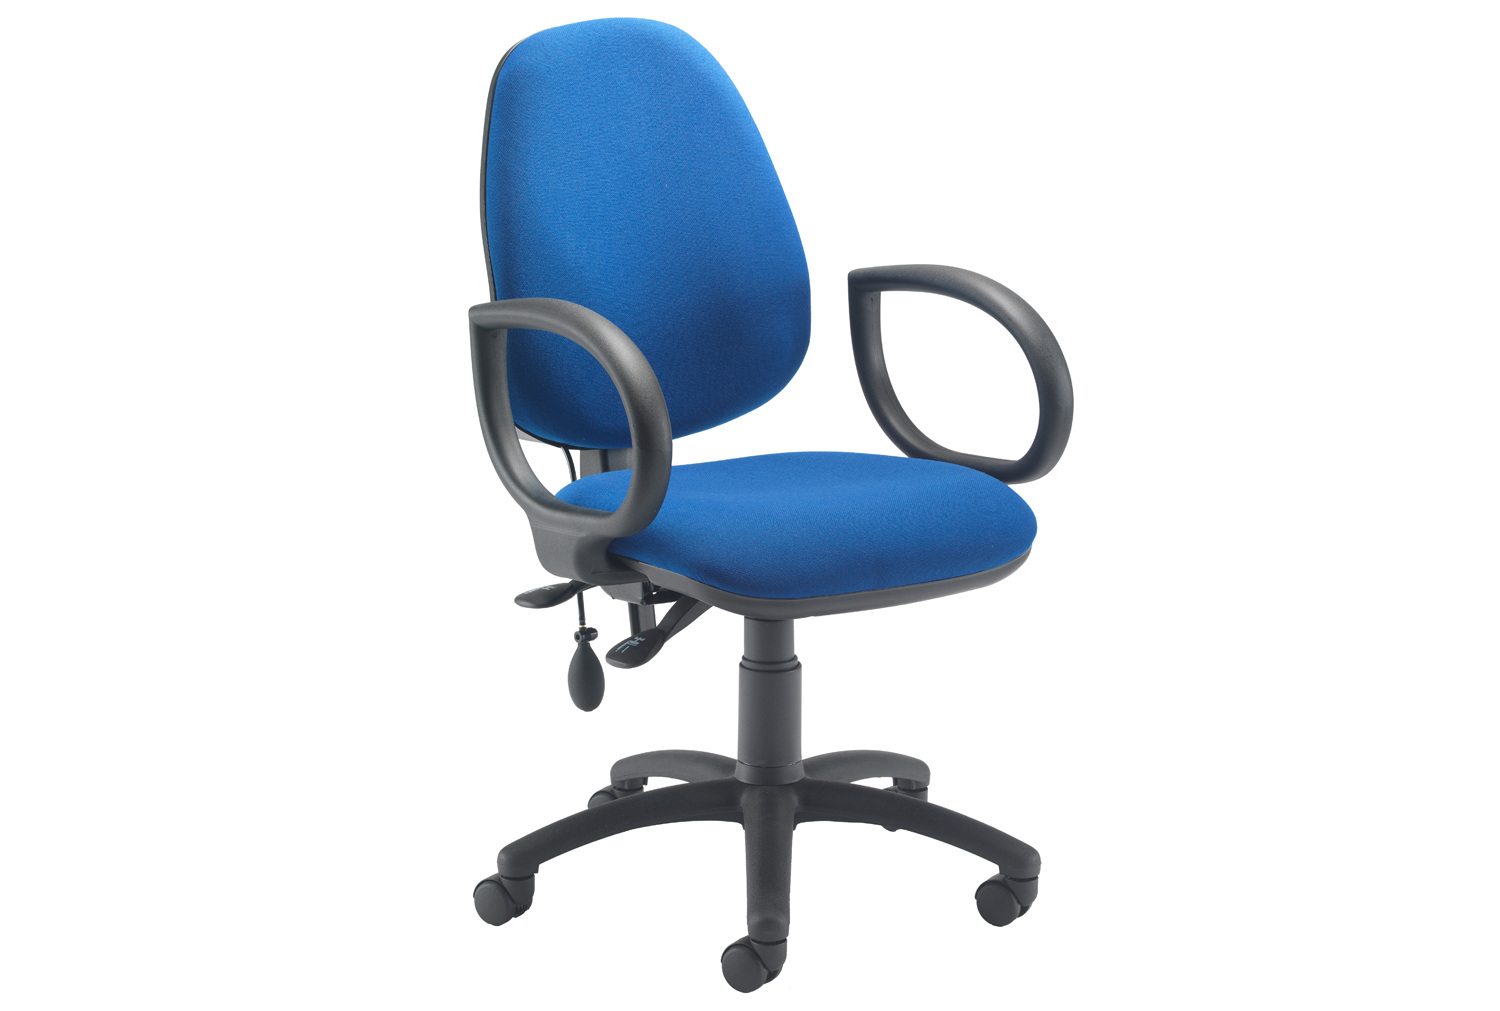 Orchid Lumbar Pump Ergonomic Operator Office Chair With Fixed Arms, Charcoal, Express Delivery